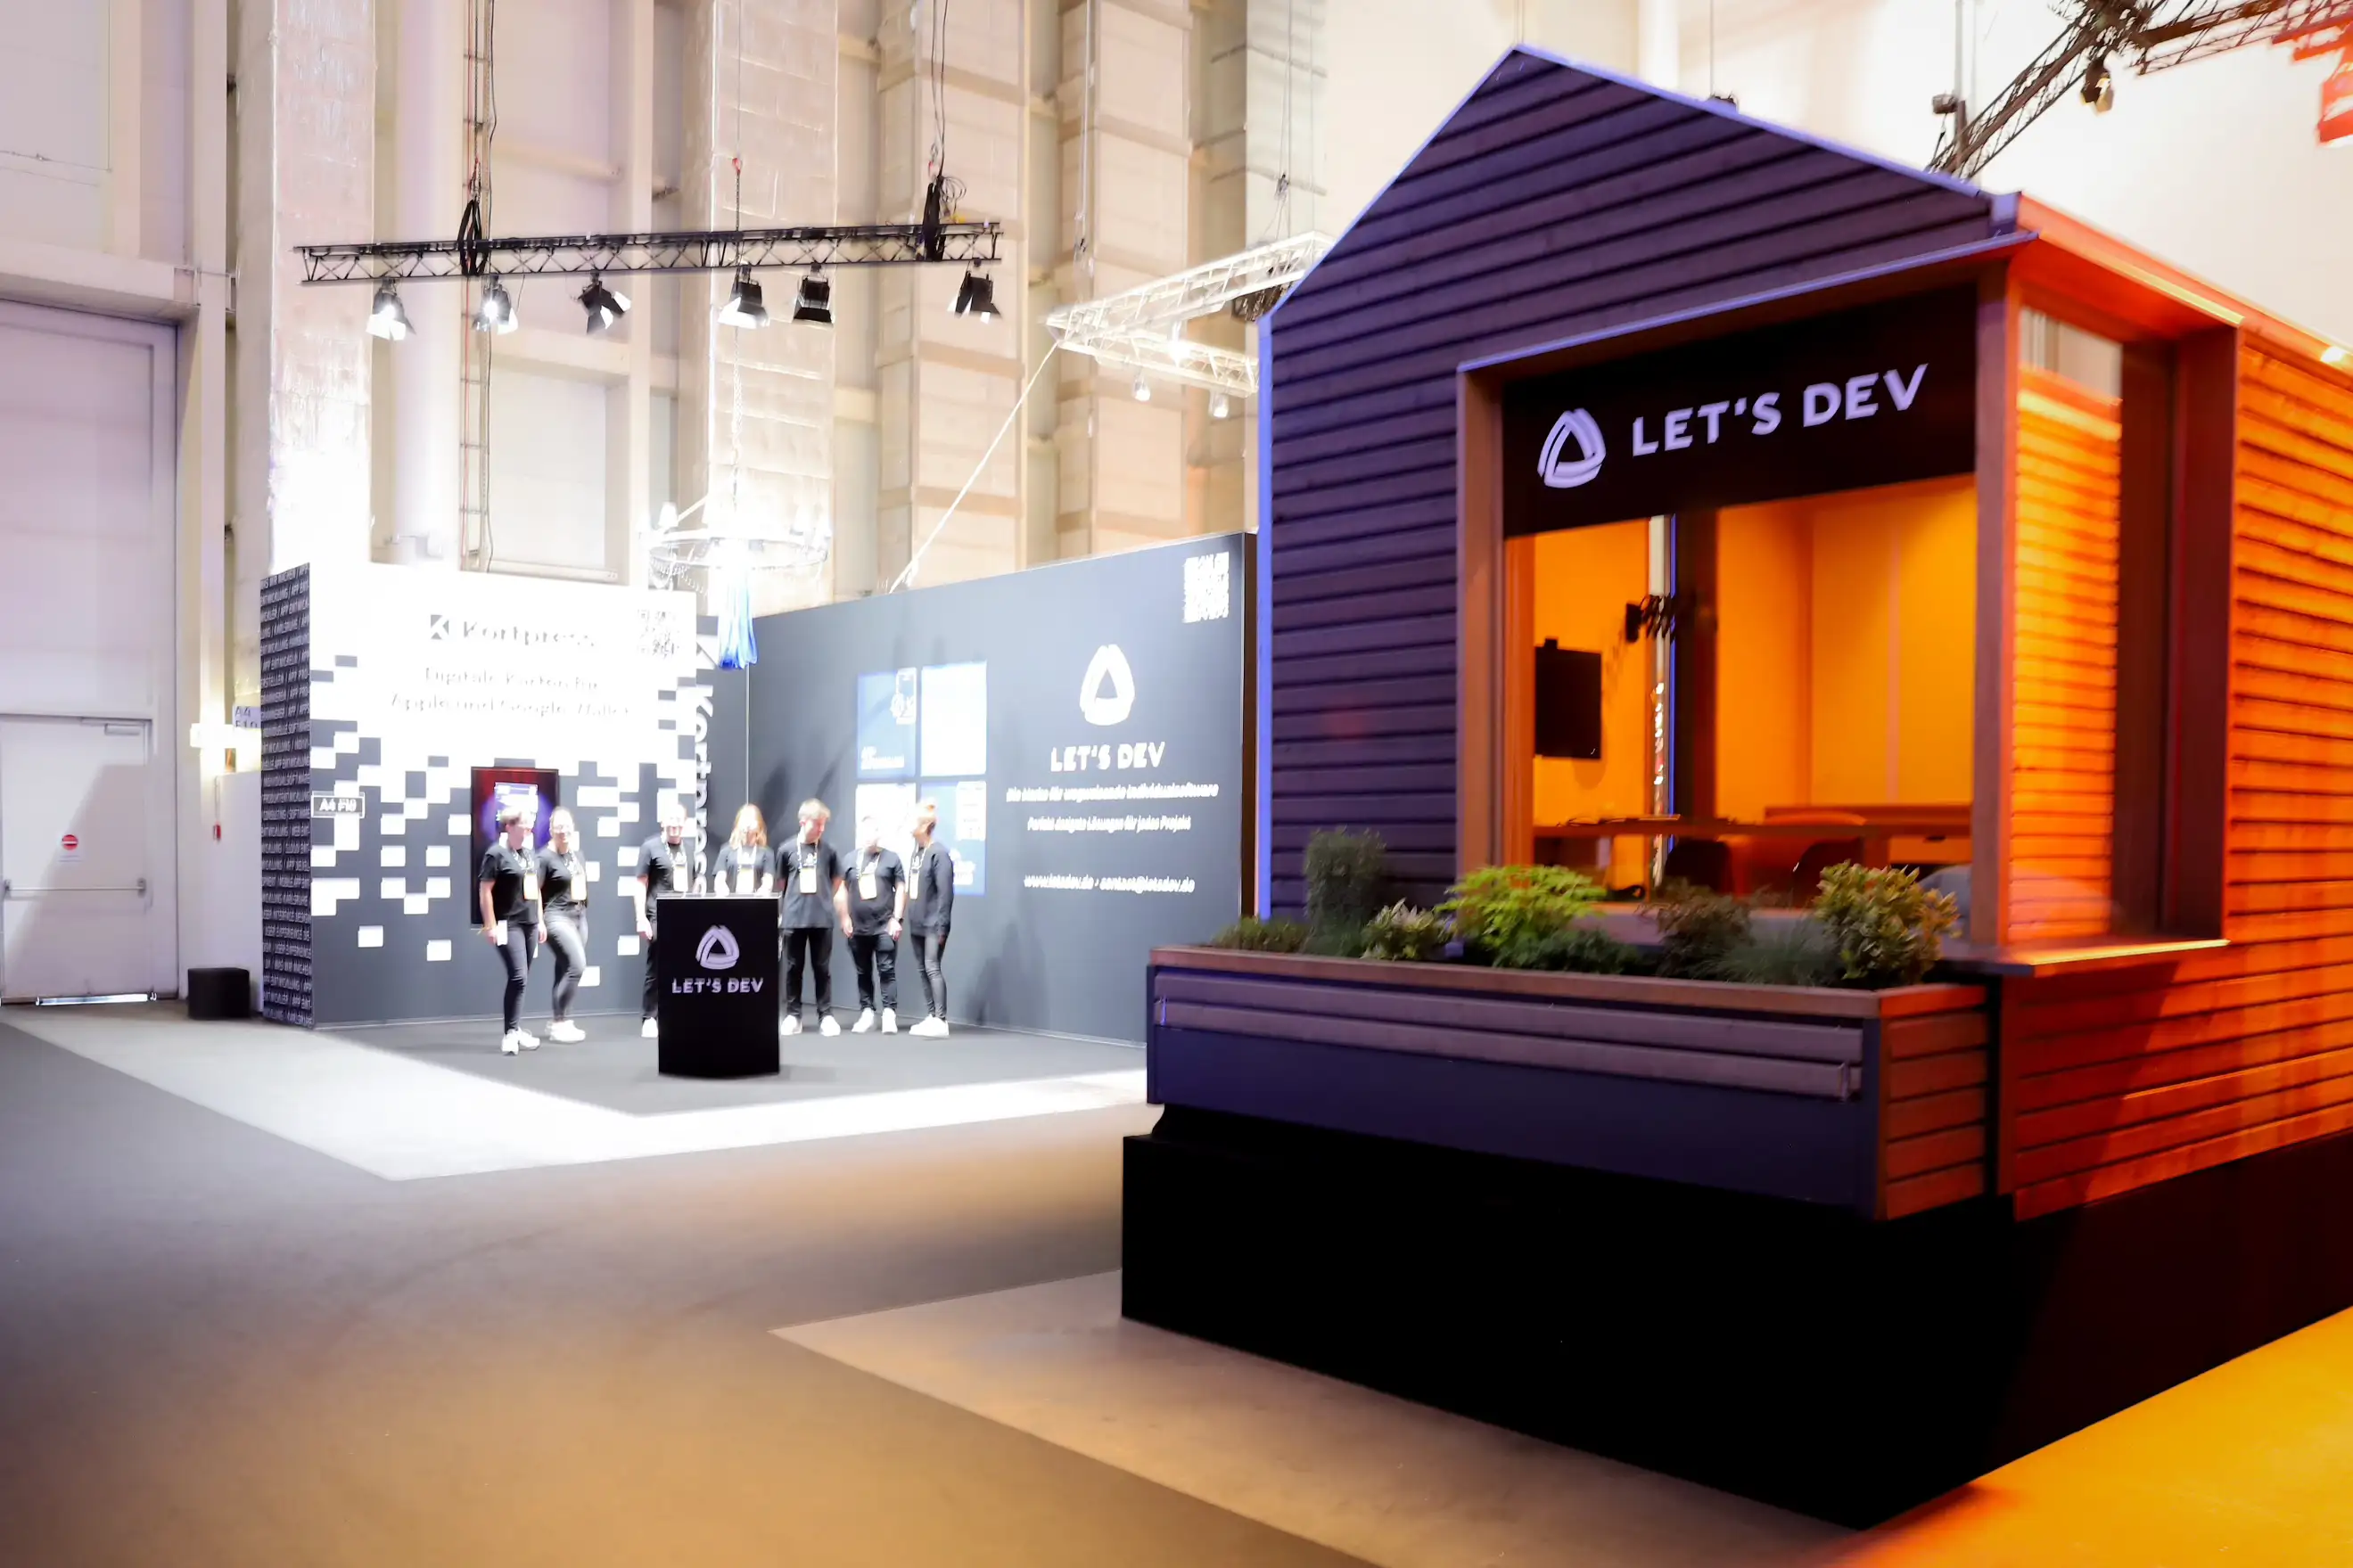 Photo of the tiny house at the Kortpress stand